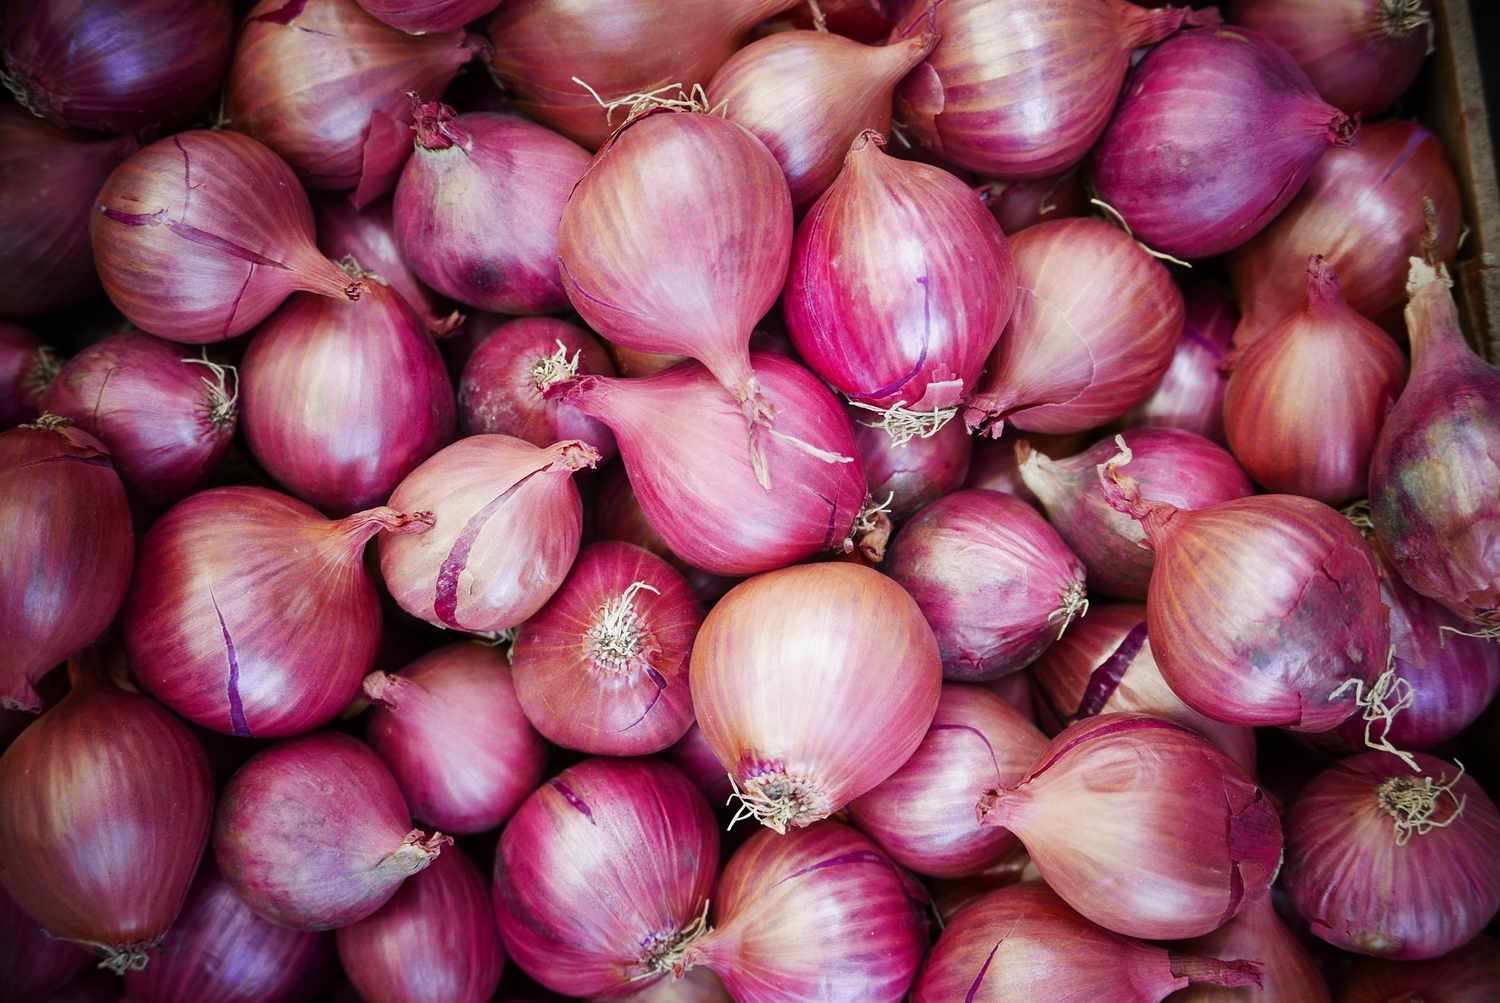 Annual circus around onions enacted again as each kg sells at over Tk200